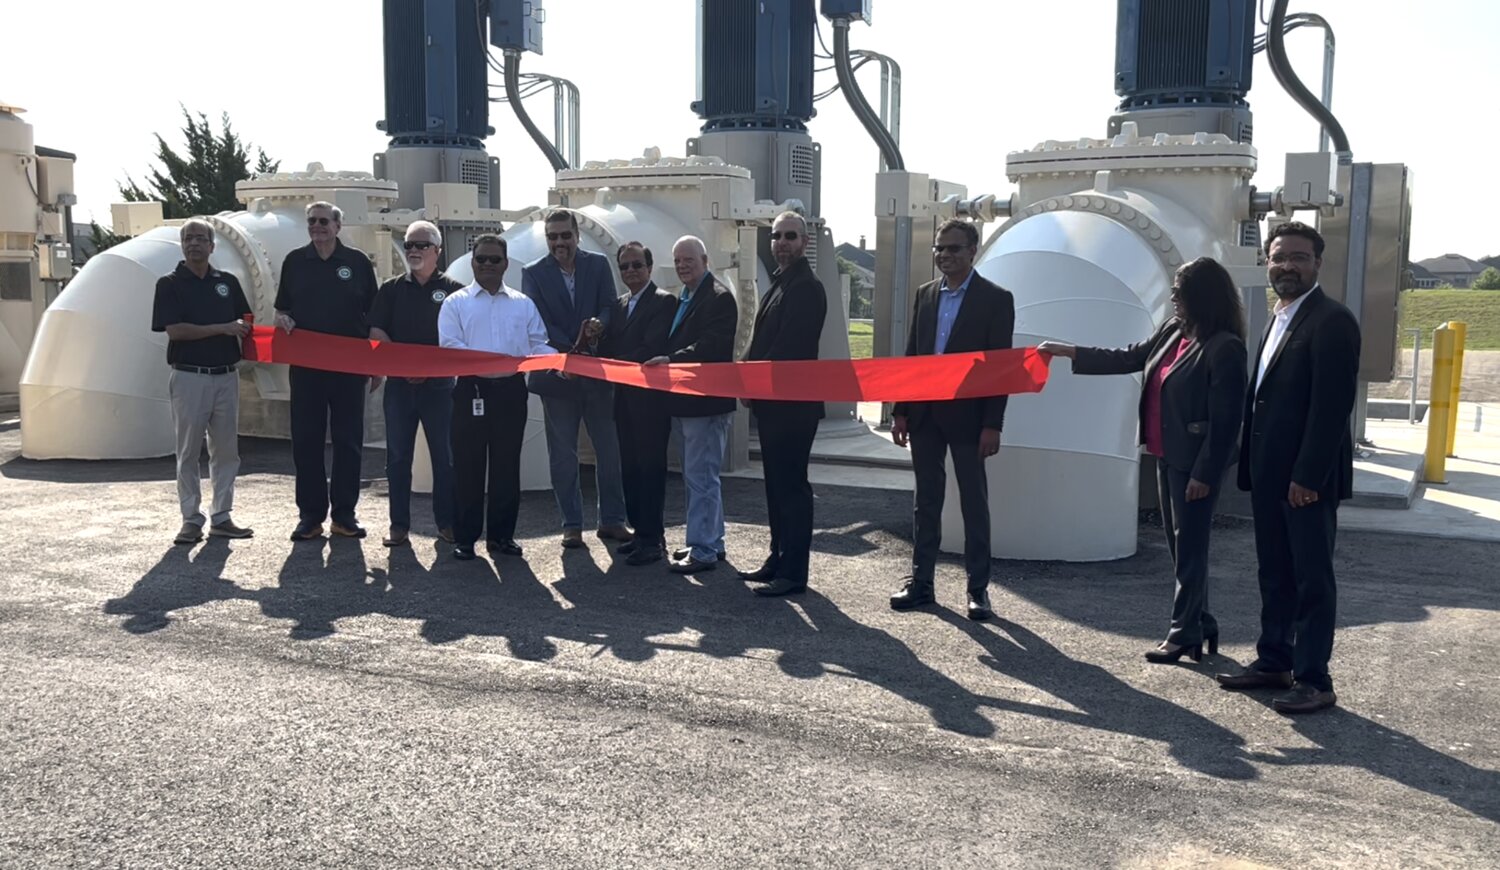 Officials, including Fort Bend County Judge KP George, fourth from left, and Pct. 3 Commissioner Andy Meyers, seventh from left, perform the ceremonial ribbon cutting at the Steep Bank Creek Pump Station.